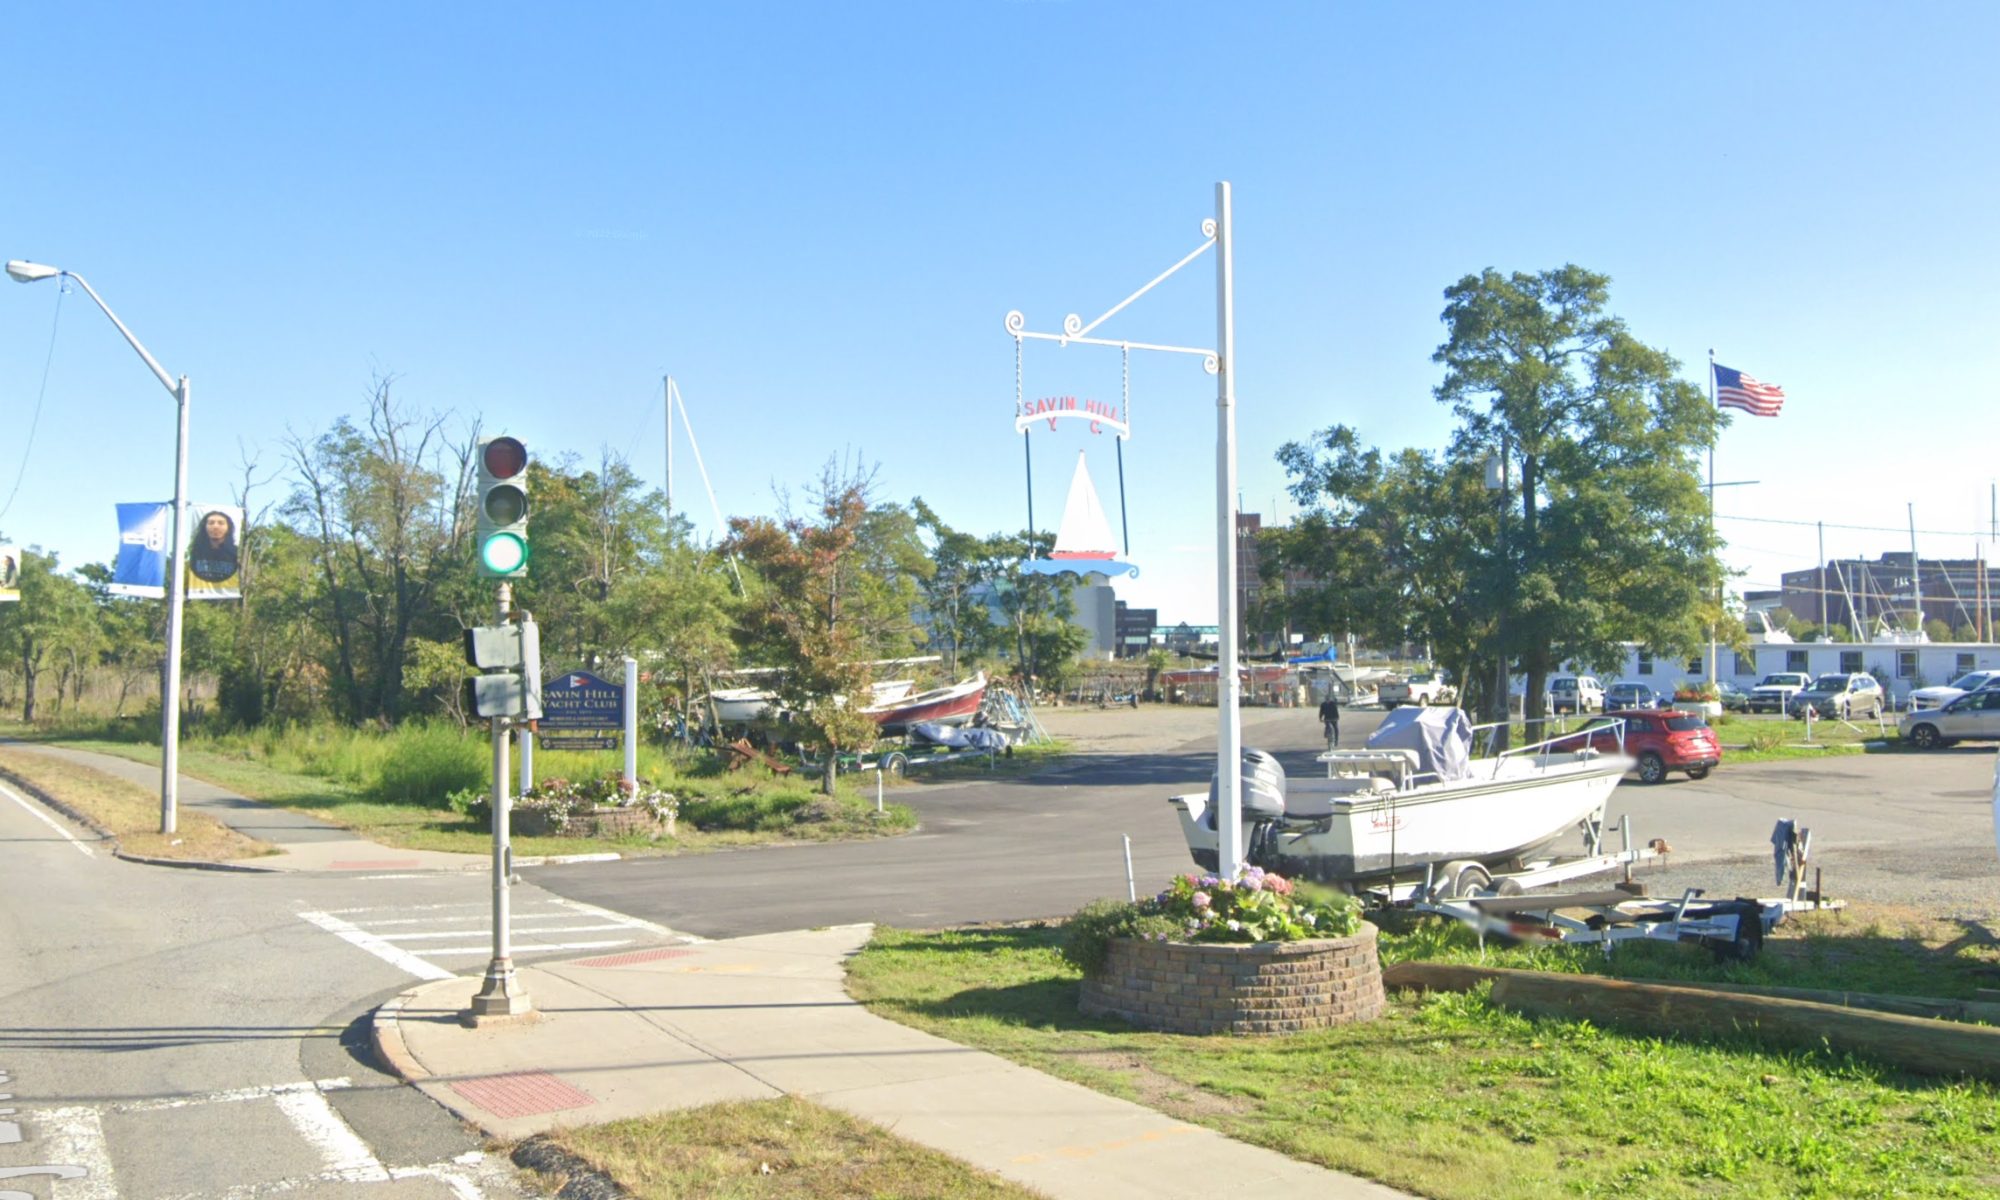 View of Savin Hill Yacht Club from the street